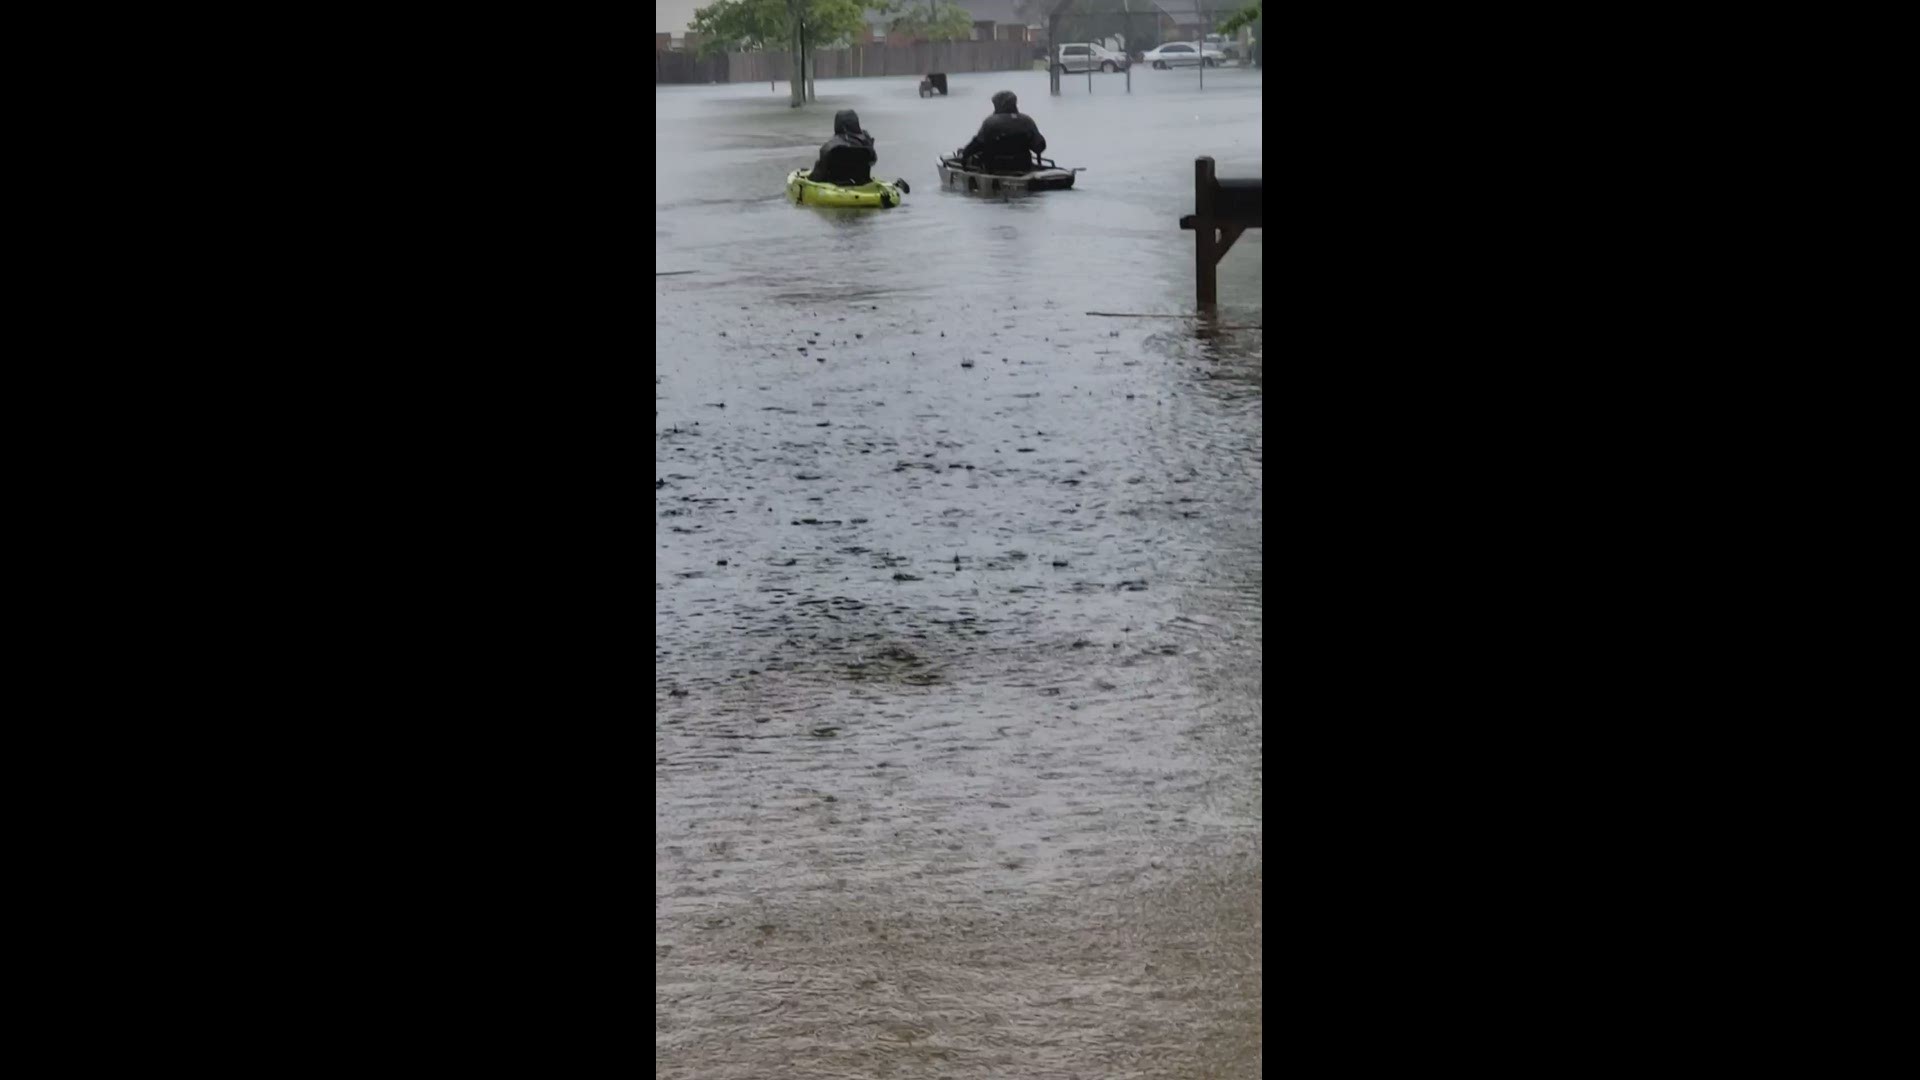 Kayakers took advantage of high water after a downpour flooded streets in Bacliff.